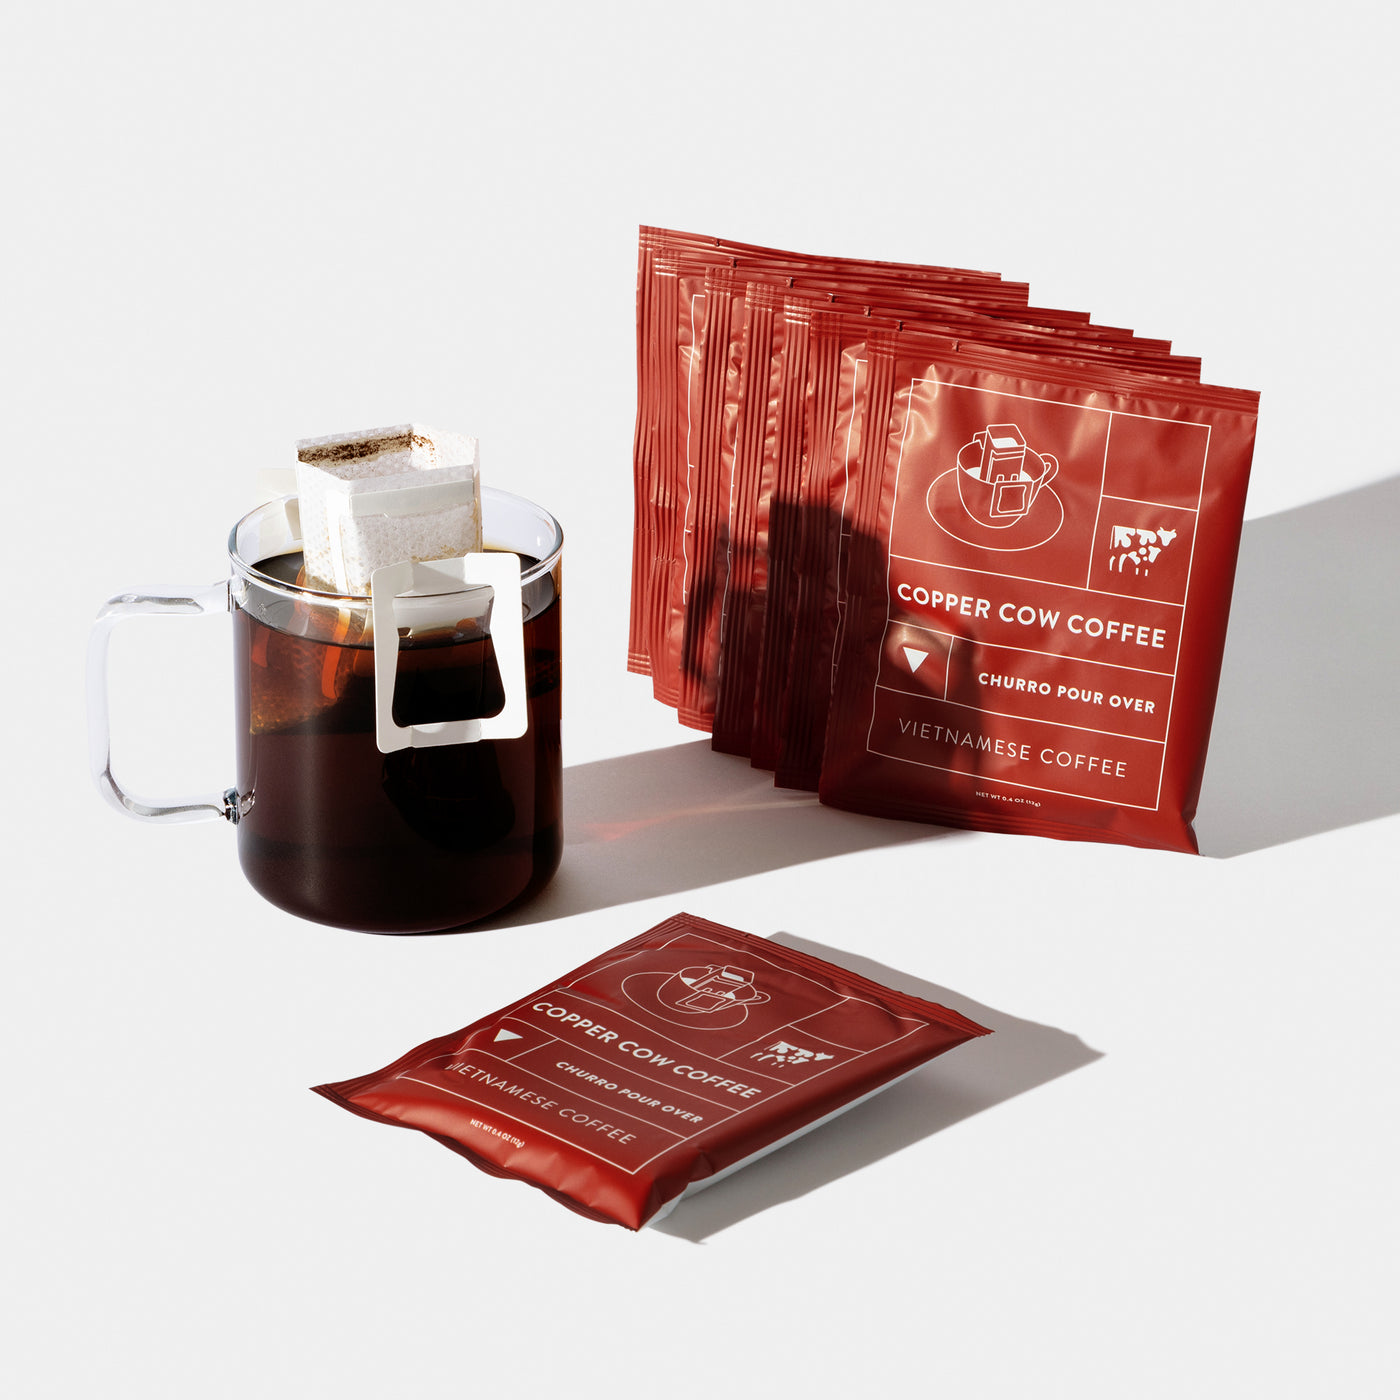 8-Pack of Churro Vietnamese Coffee single-serve pour over pouches.